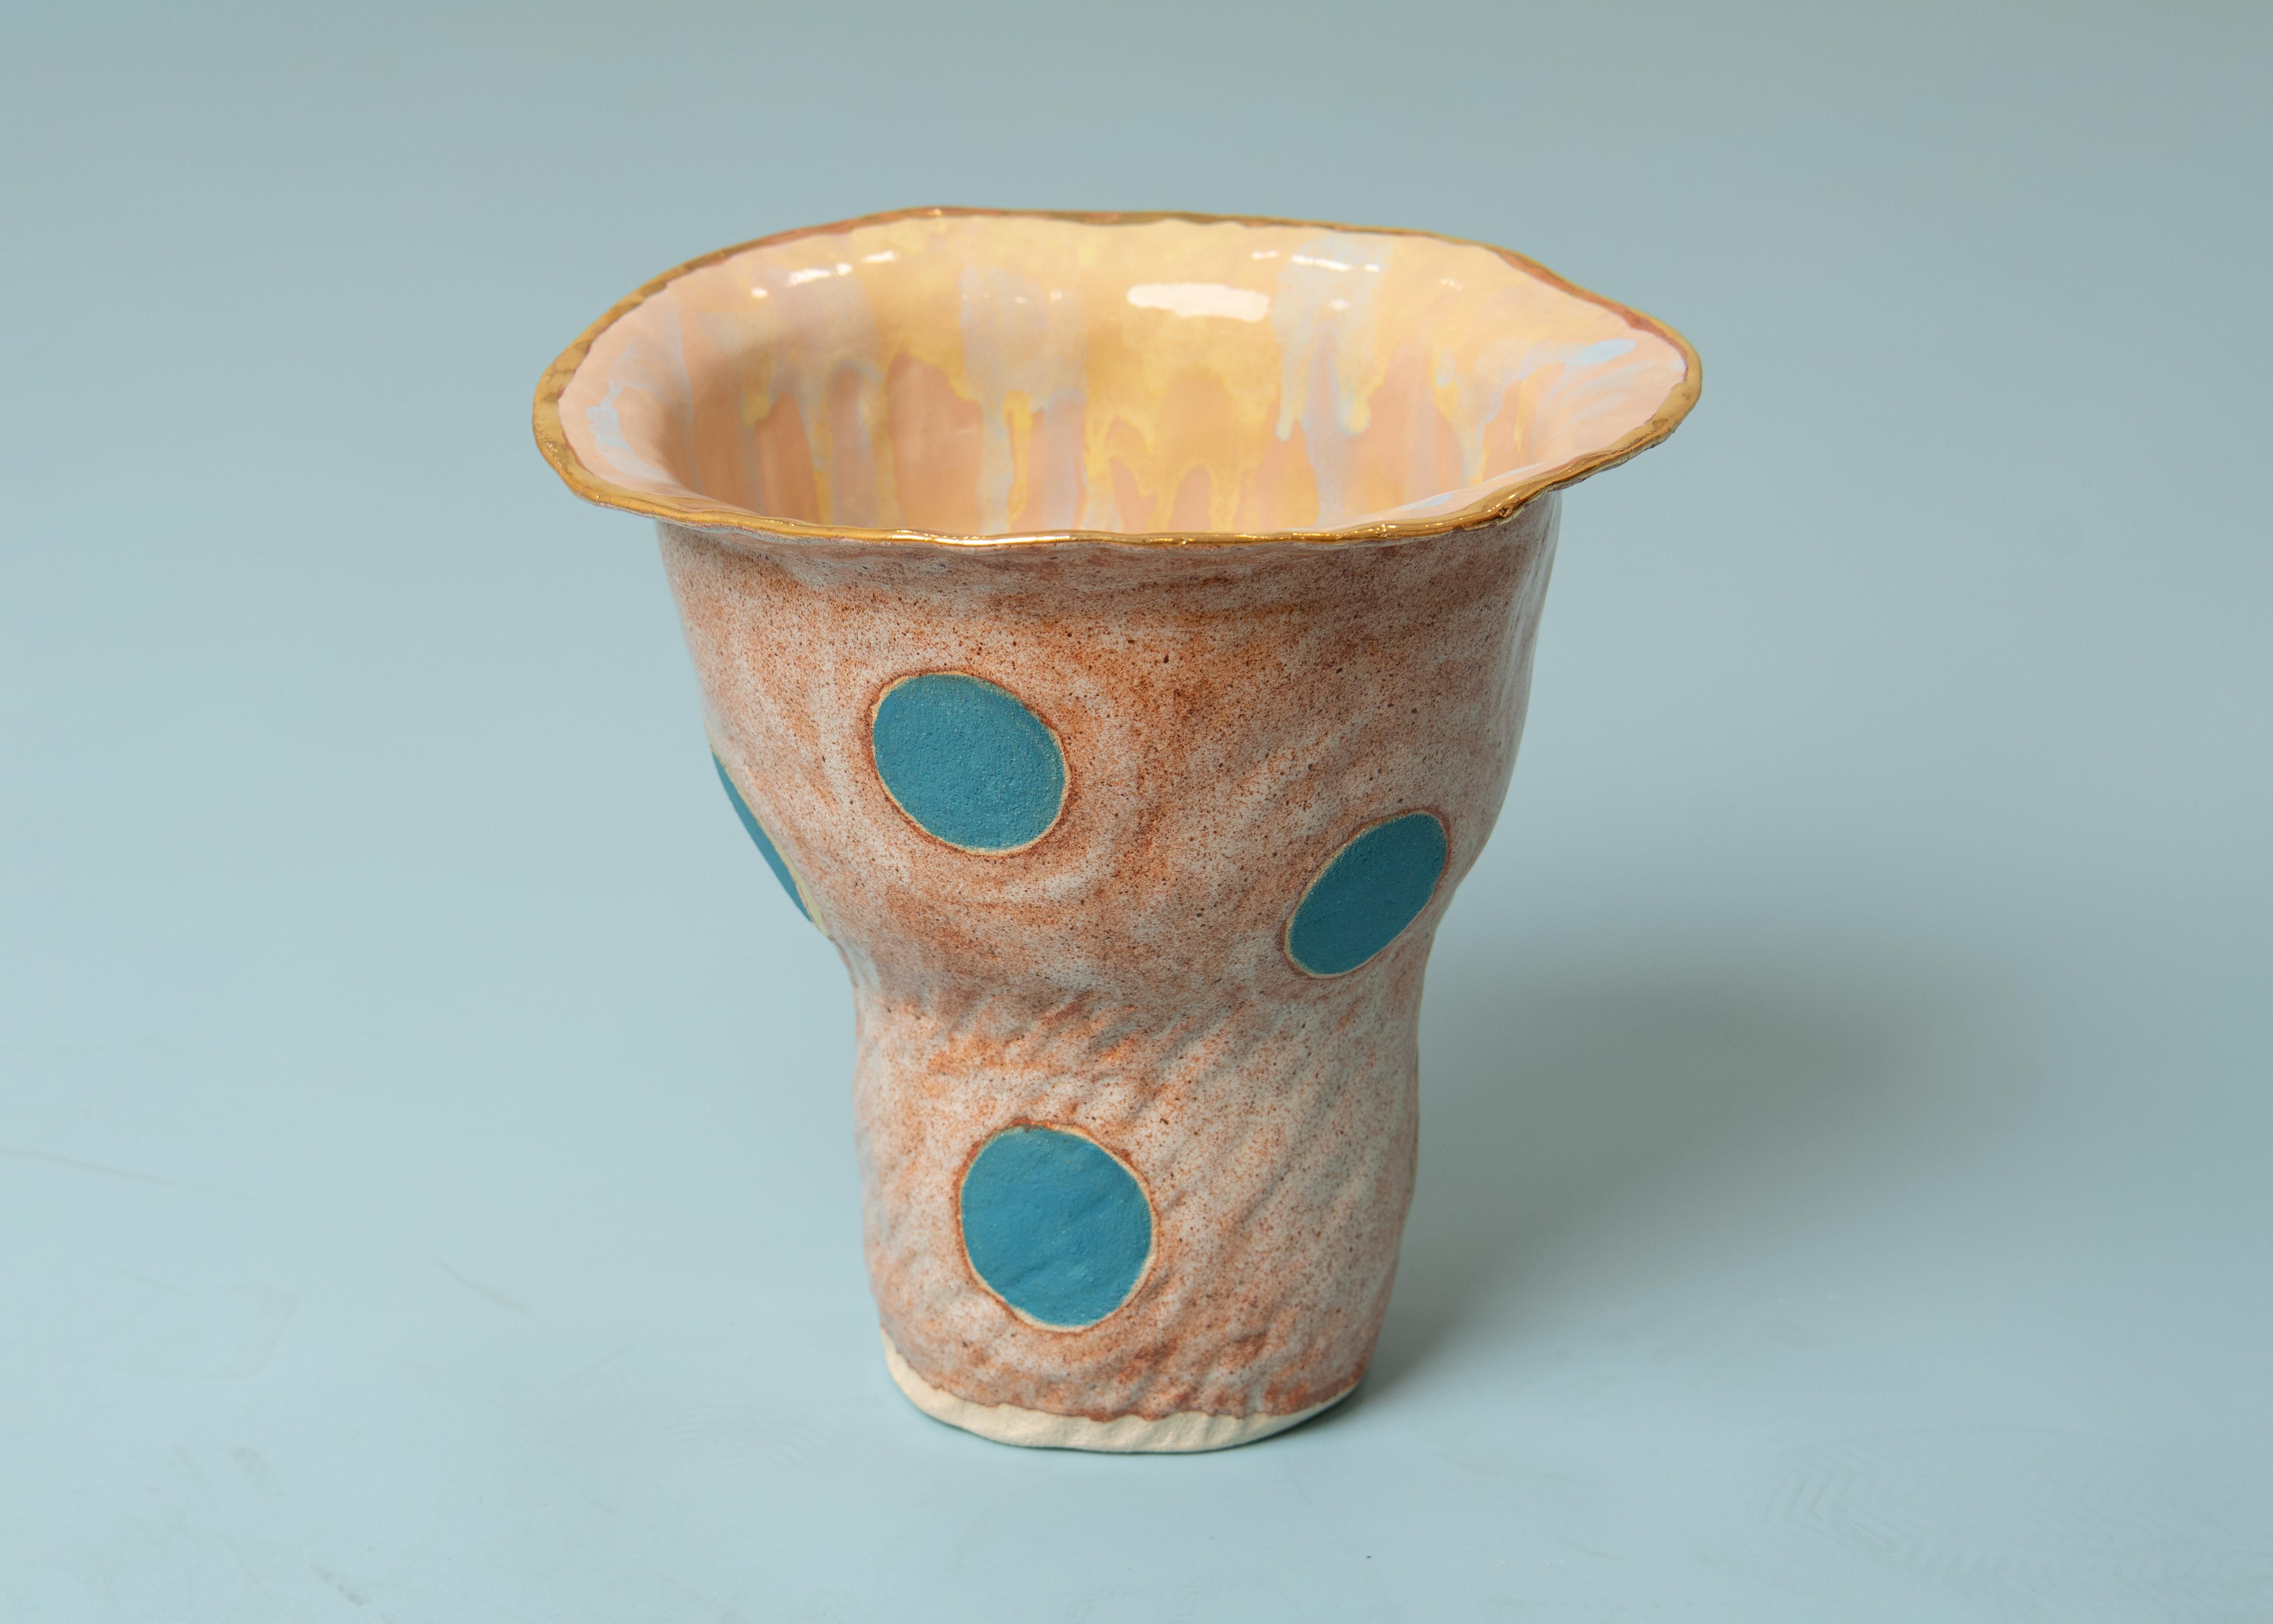 Numbered Olé Vase in the collection Olé, a tribute to the Flamenco culture.
Built and glazed by hand, this is a unique piece. 
Materials: Ceramics stoneware, glaze, gold lustre.
Color: Beige with brown particles, Blue tuquoise dots
The Olé vase